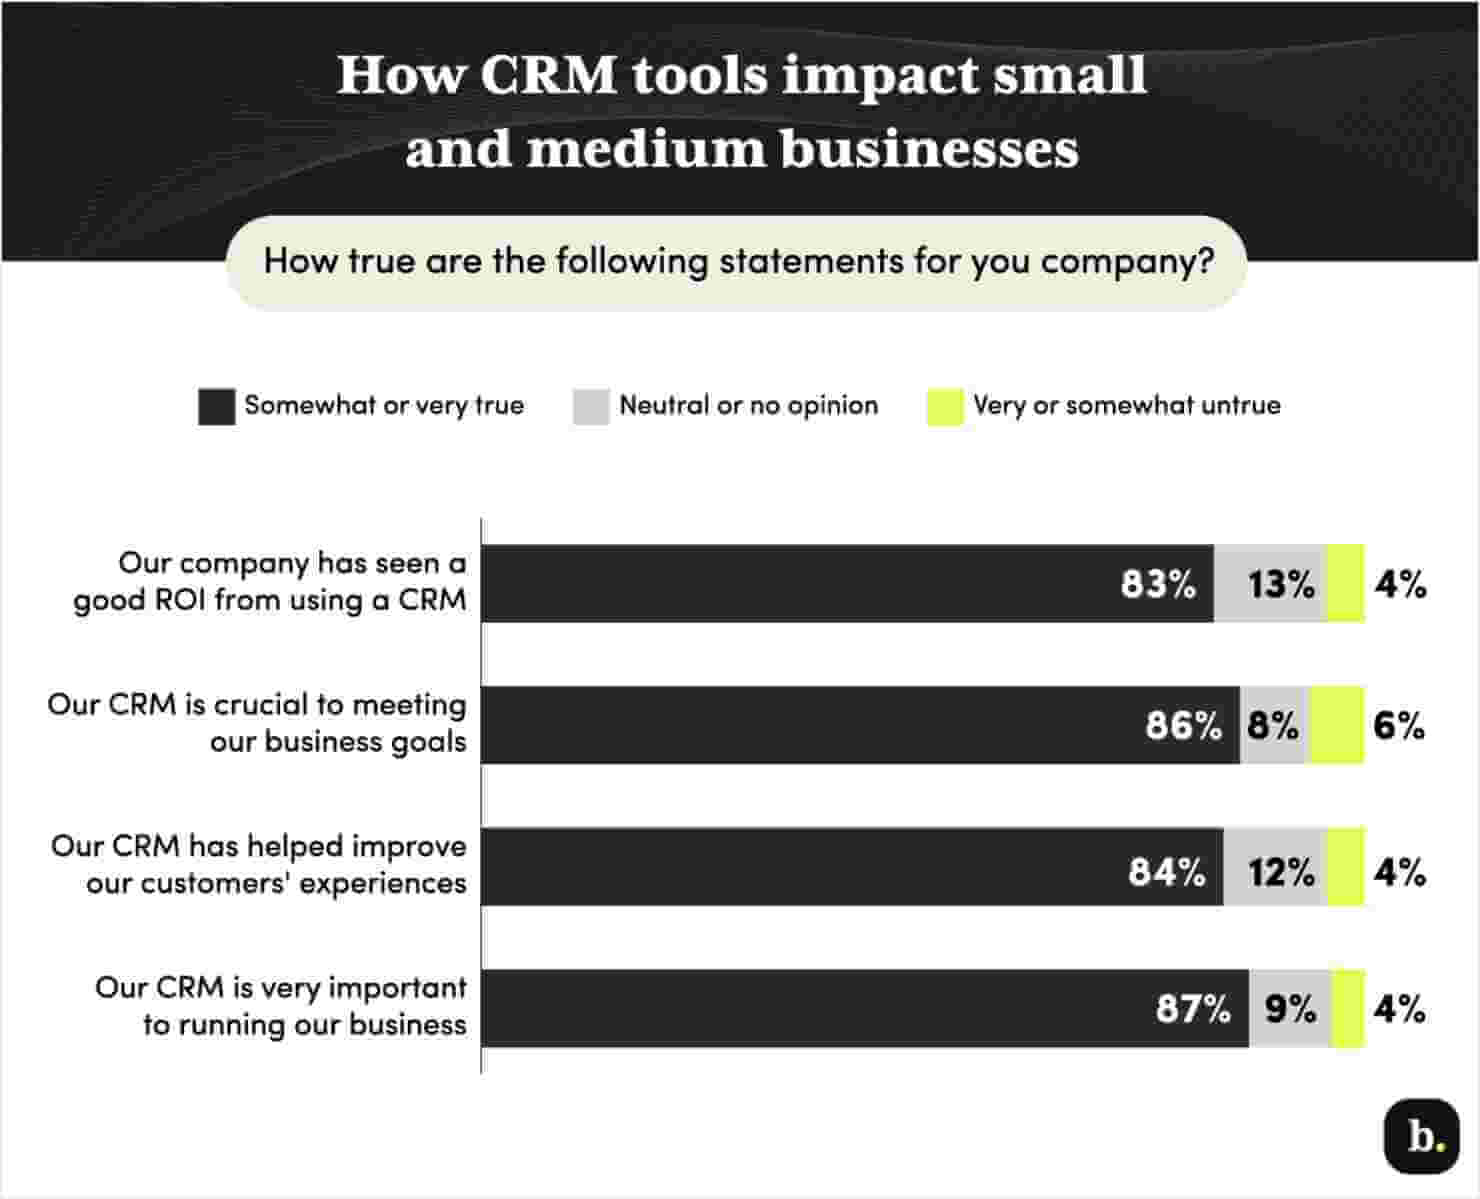  This image is a bar chart from business.com, titled "How CRM tools impact small and medium businesses" with the question "How true are the following statements for your company?" It presents four statements with responses categorized as "Somewhat or very true," "Neutral or no opinion," and "Very or somewhat untrue." The statements and their positive responses are: "Our company has seen a good ROI from using a CRM" (83% true), "Our CRM is crucial to meeting our business goals" (86% true), "Our CRM has helped improve our customers' experiences" (84% true), and "Our CRM is very important to running our business" (87% true). Neutral and negative responses are minimal. 